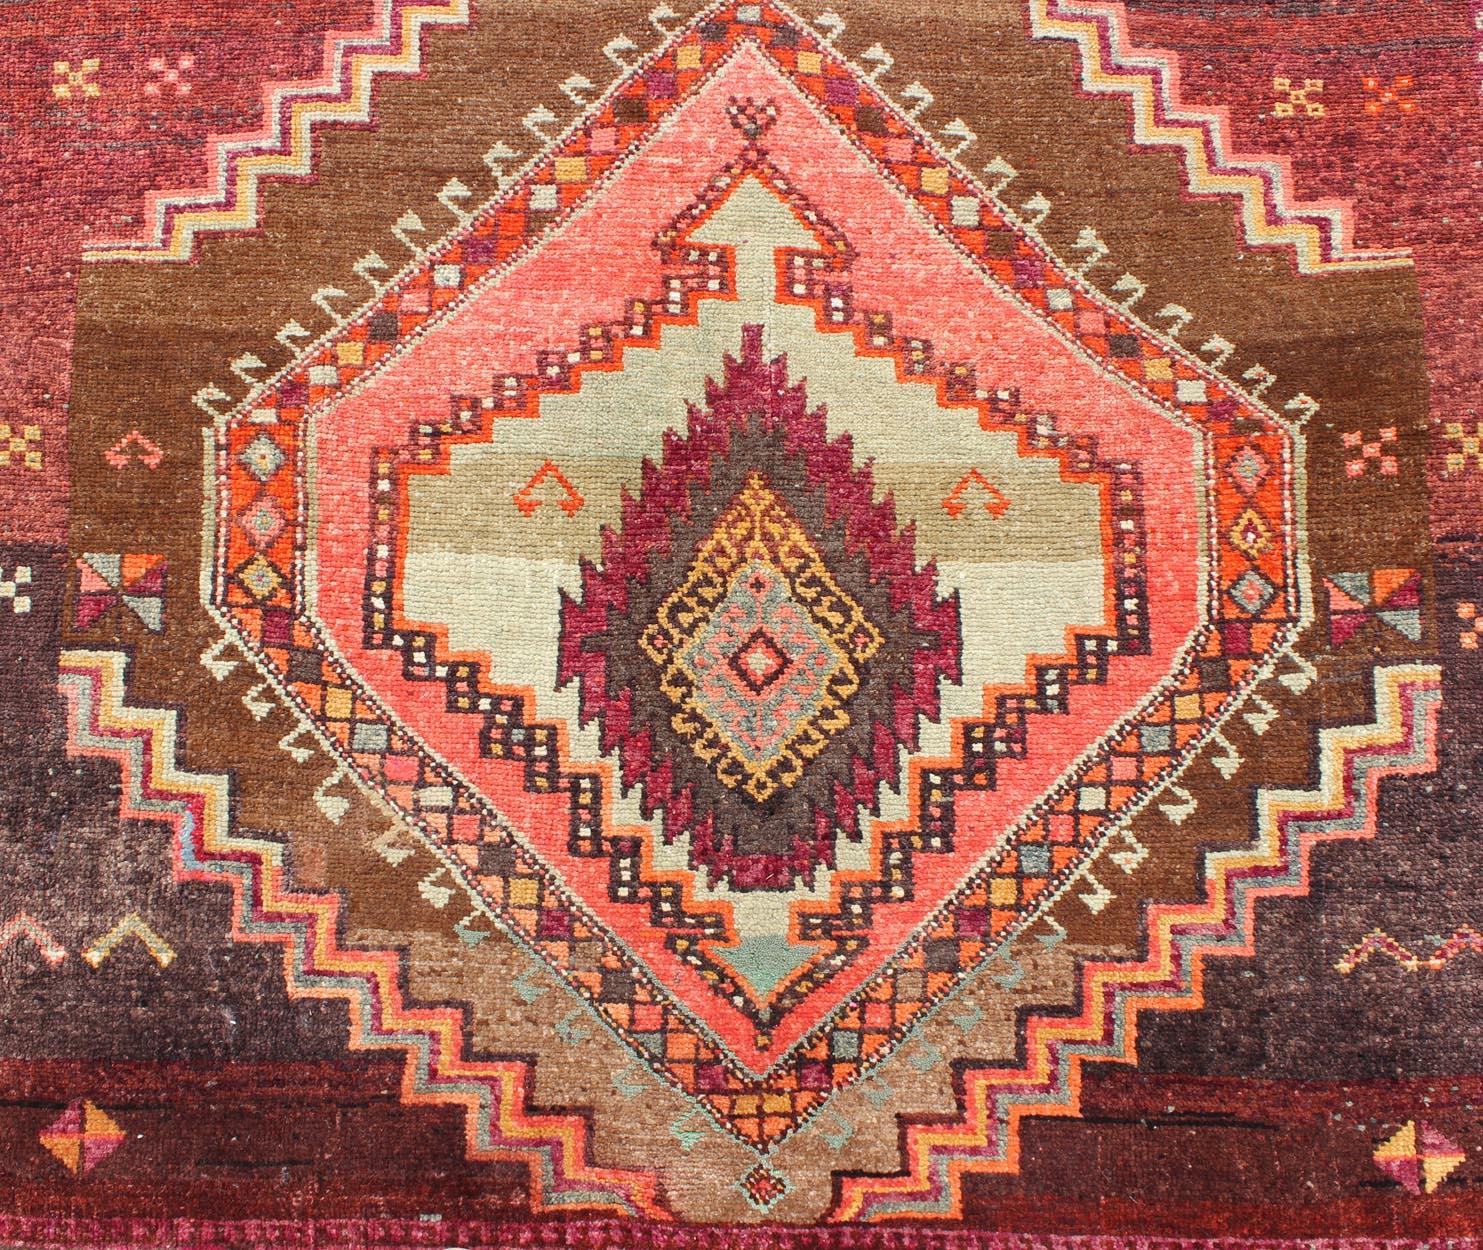 Large Gallery Rug with Geometric Medallions in Dark Brown, Orange & Multi Colors In Excellent Condition For Sale In Atlanta, GA